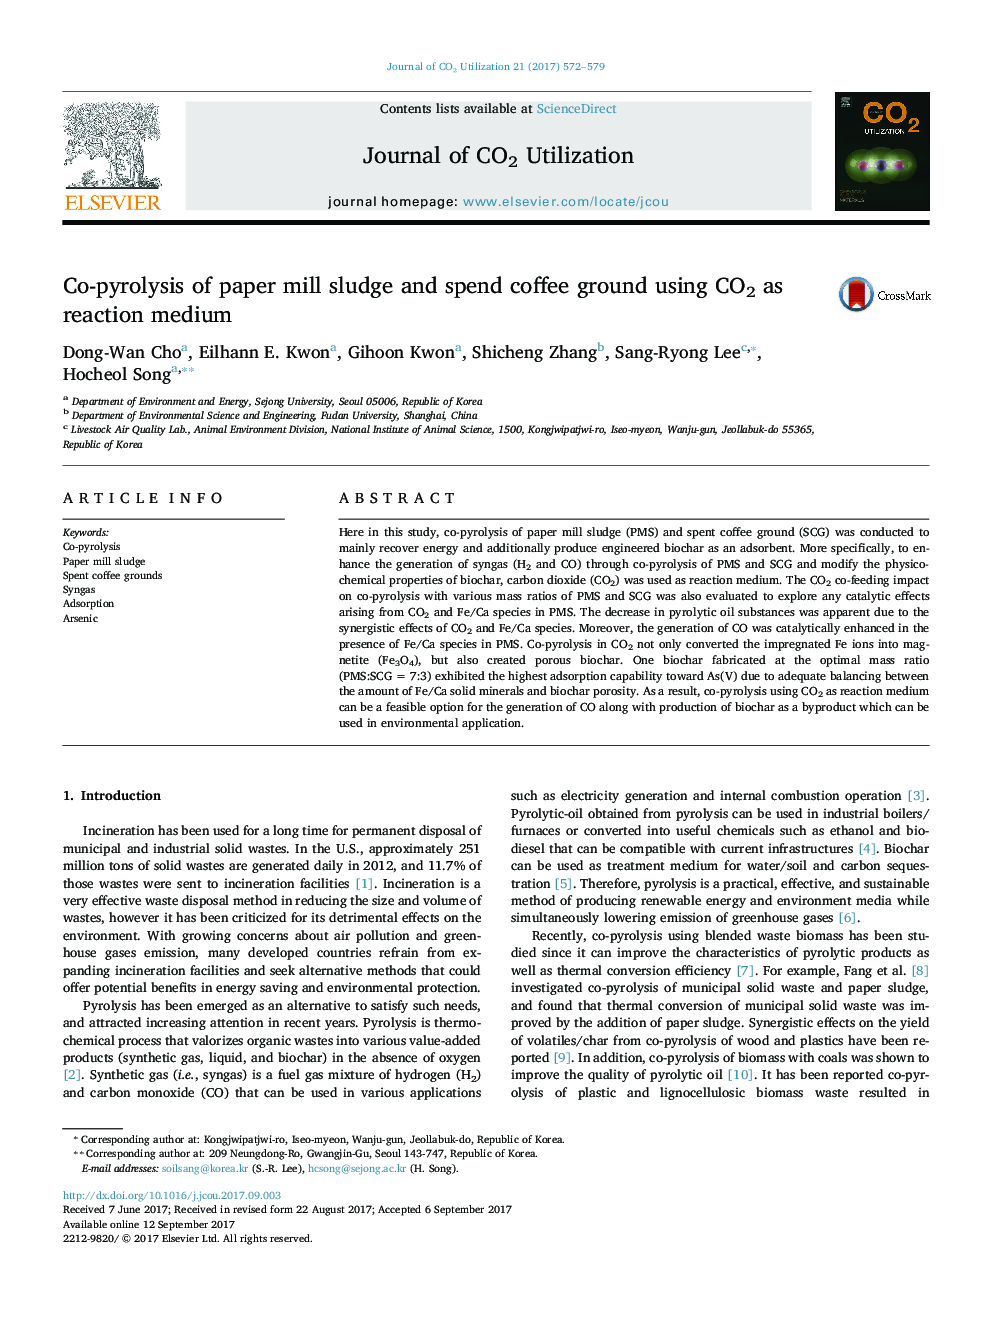 Co-pyrolysis of paper mill sludge and spend coffee ground using CO2 as reaction medium